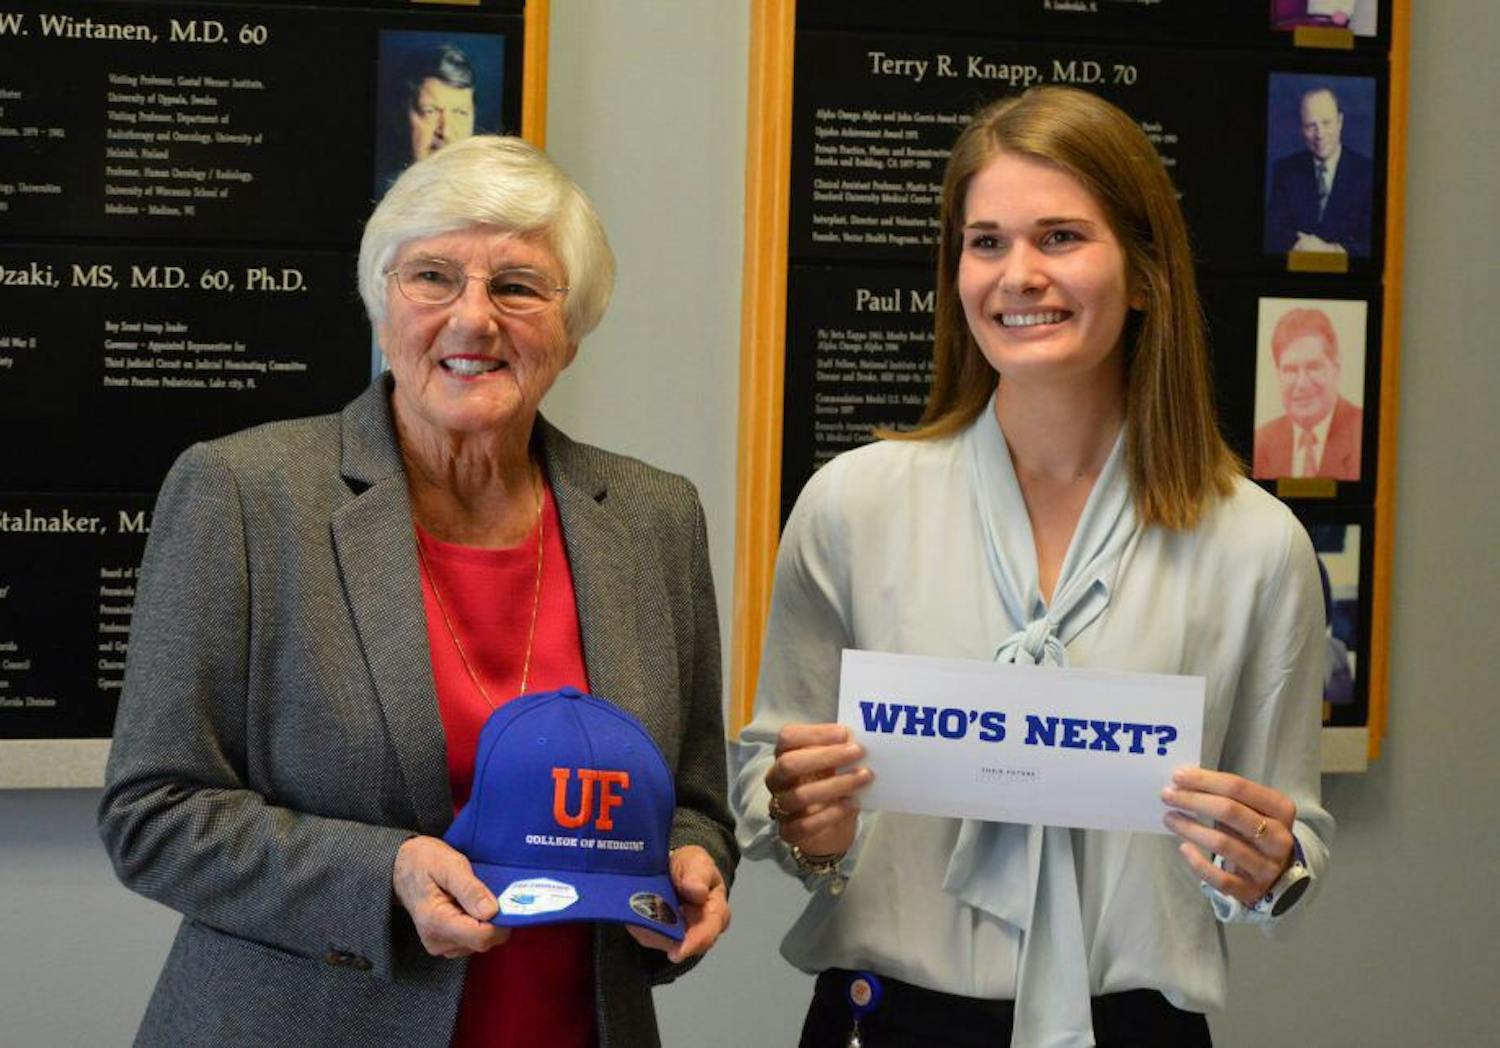 The first woman graduate of the UF College of Medicine, 81-year-old Dr. Jean Bennett, and Jane Harrell, a 23-year-old UF medical student, pose at a scholarship award ceremony in February. Harrell was awarded a yearly $5,000 scholarship named after Bennett.